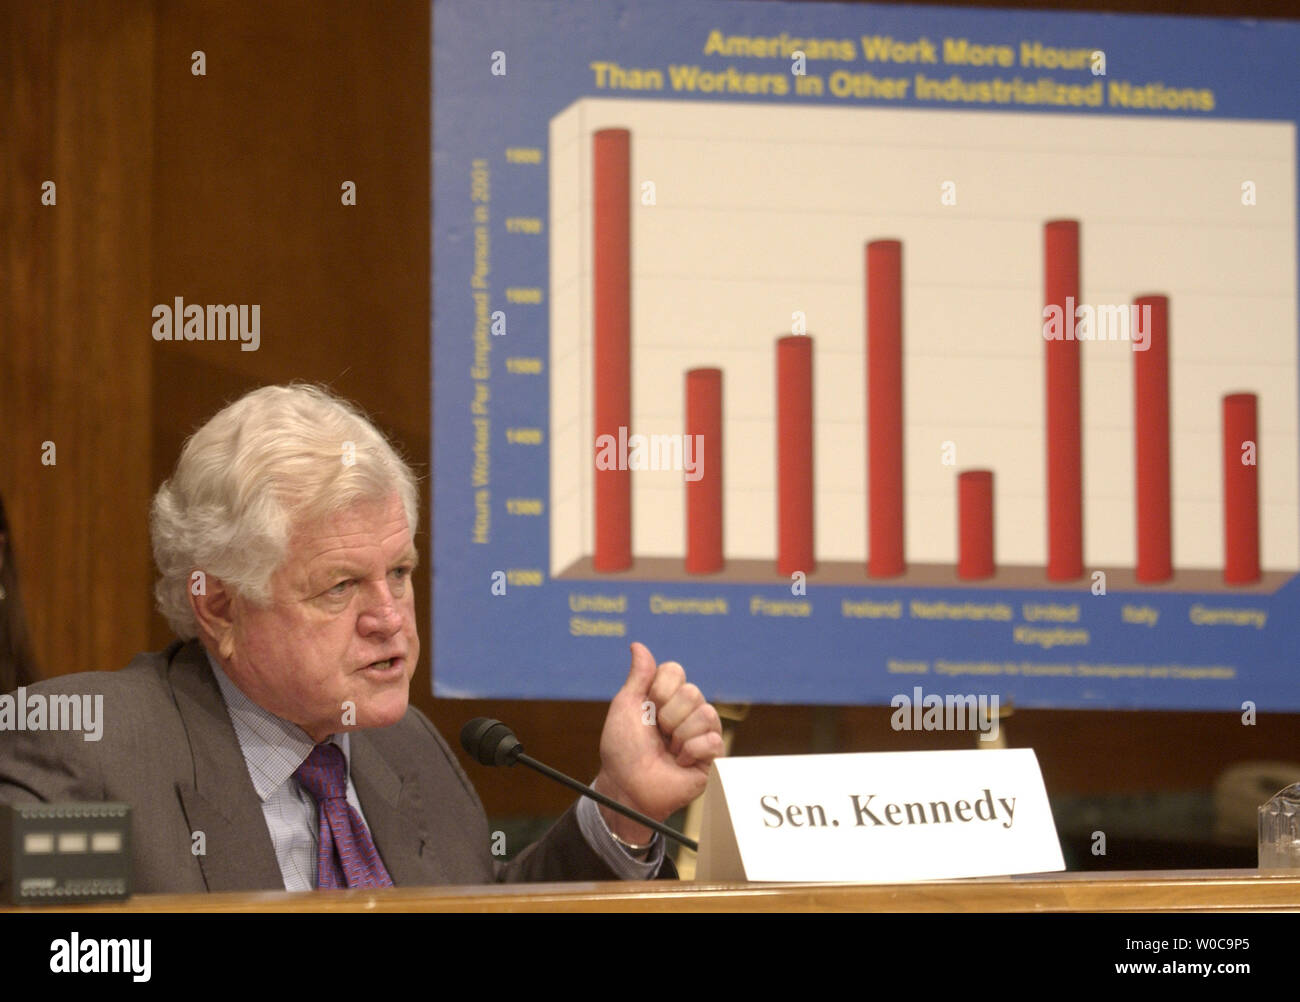 Senator Ted Kennedy, D-Mass, gives his opening remarks during a democratic policy hearing on the Labor Department's attempt to change over time pay policies in America, on December 11, 2003 in Washington. Stock Photo